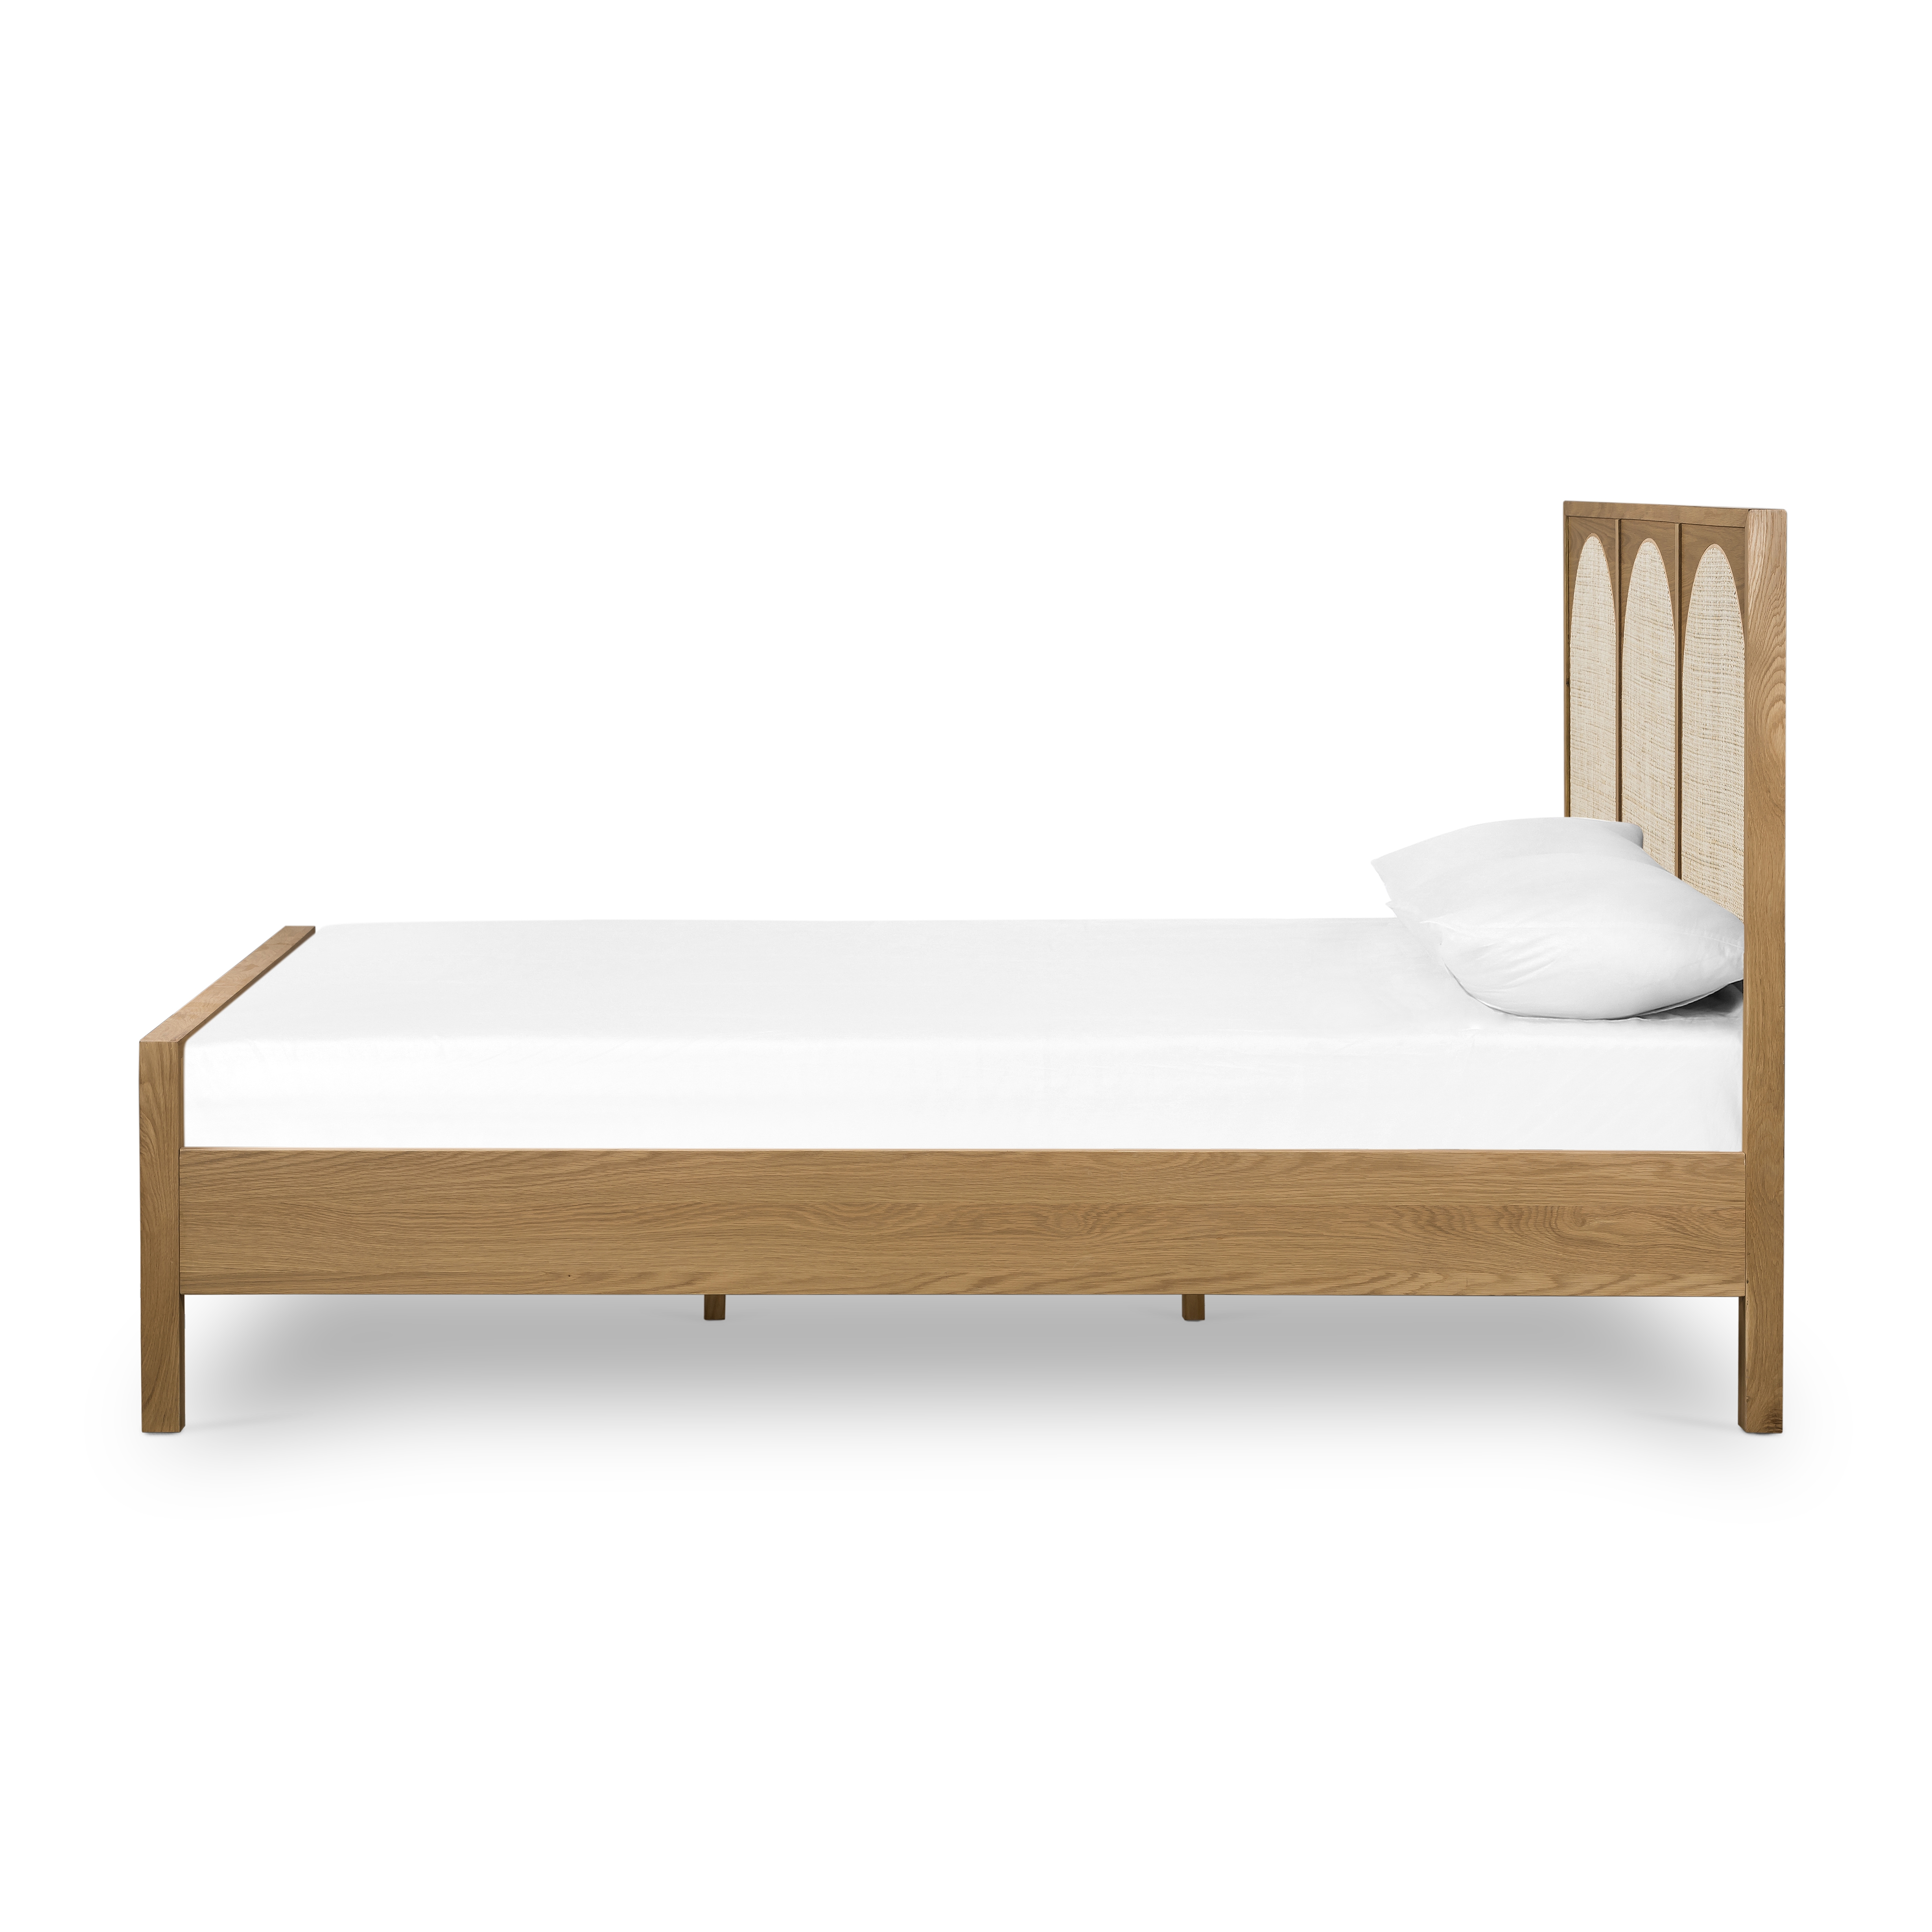 Allegra Bed-Natural Cane-Queen - Image 3